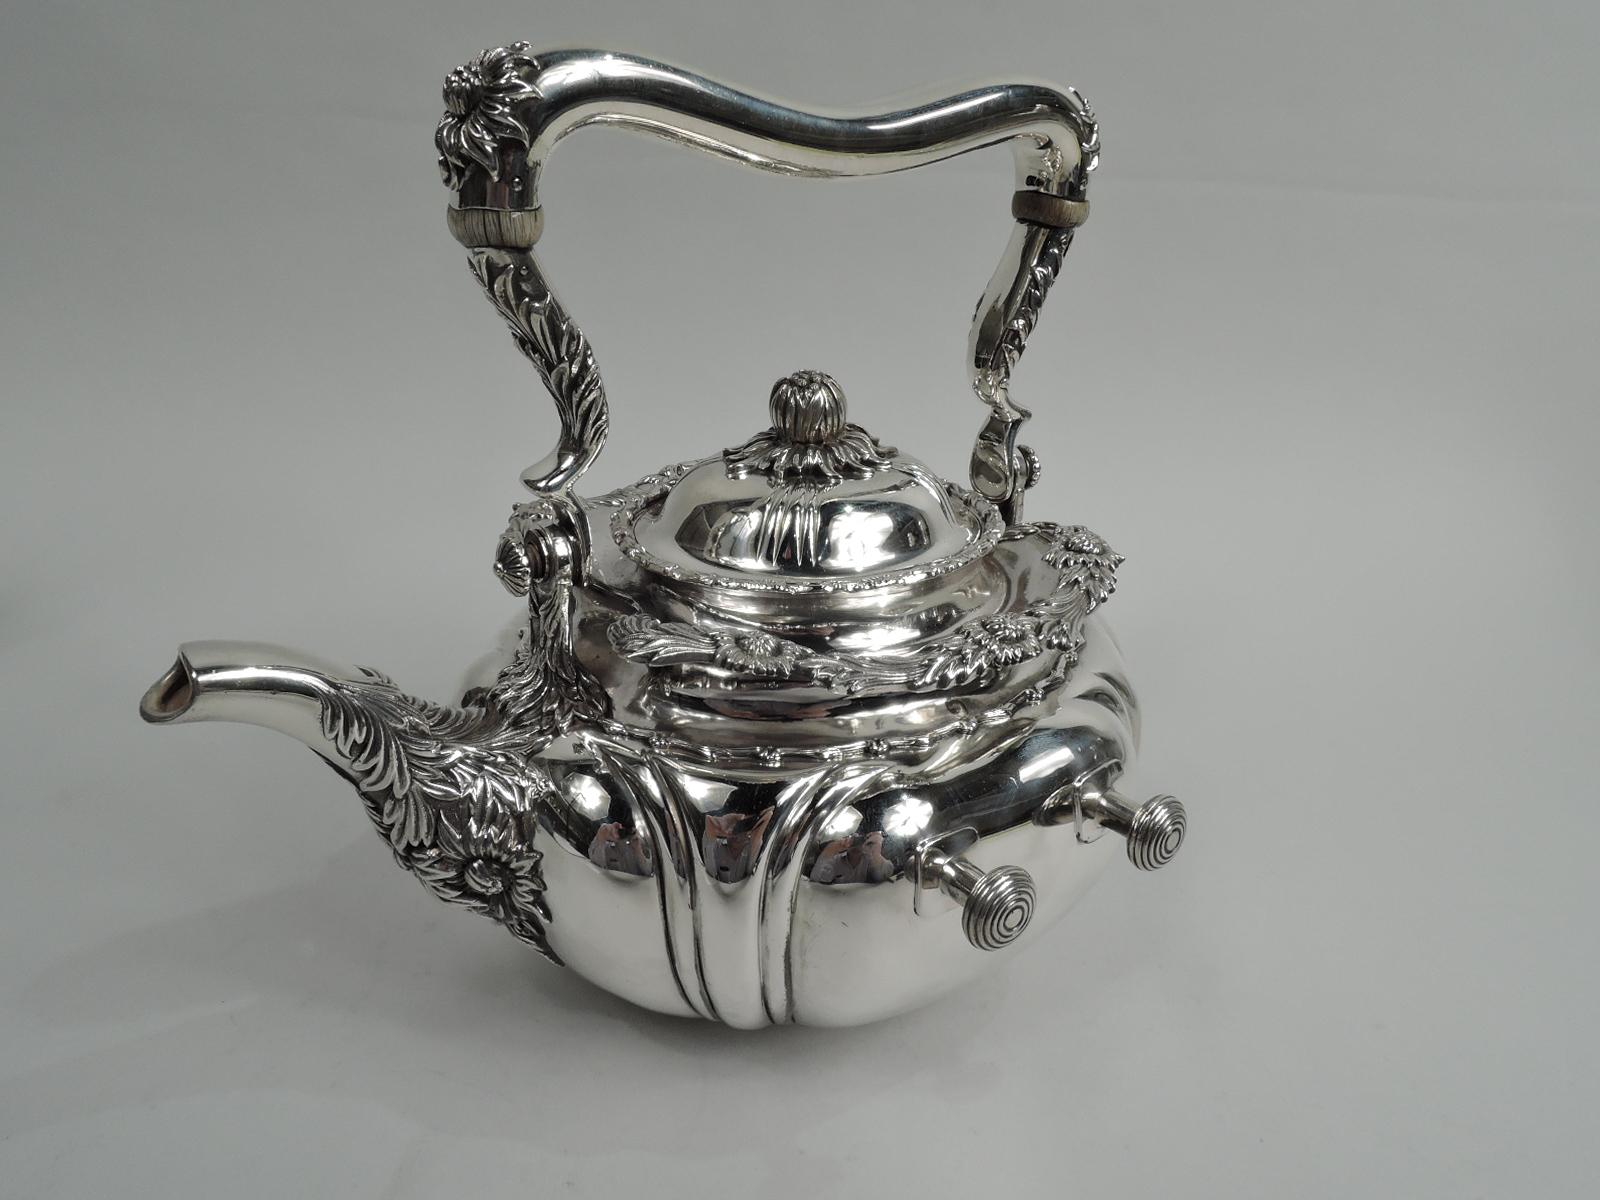 American Antique Tiffany Chrysanthemum Sterling Silver Tea Kettle on Stand